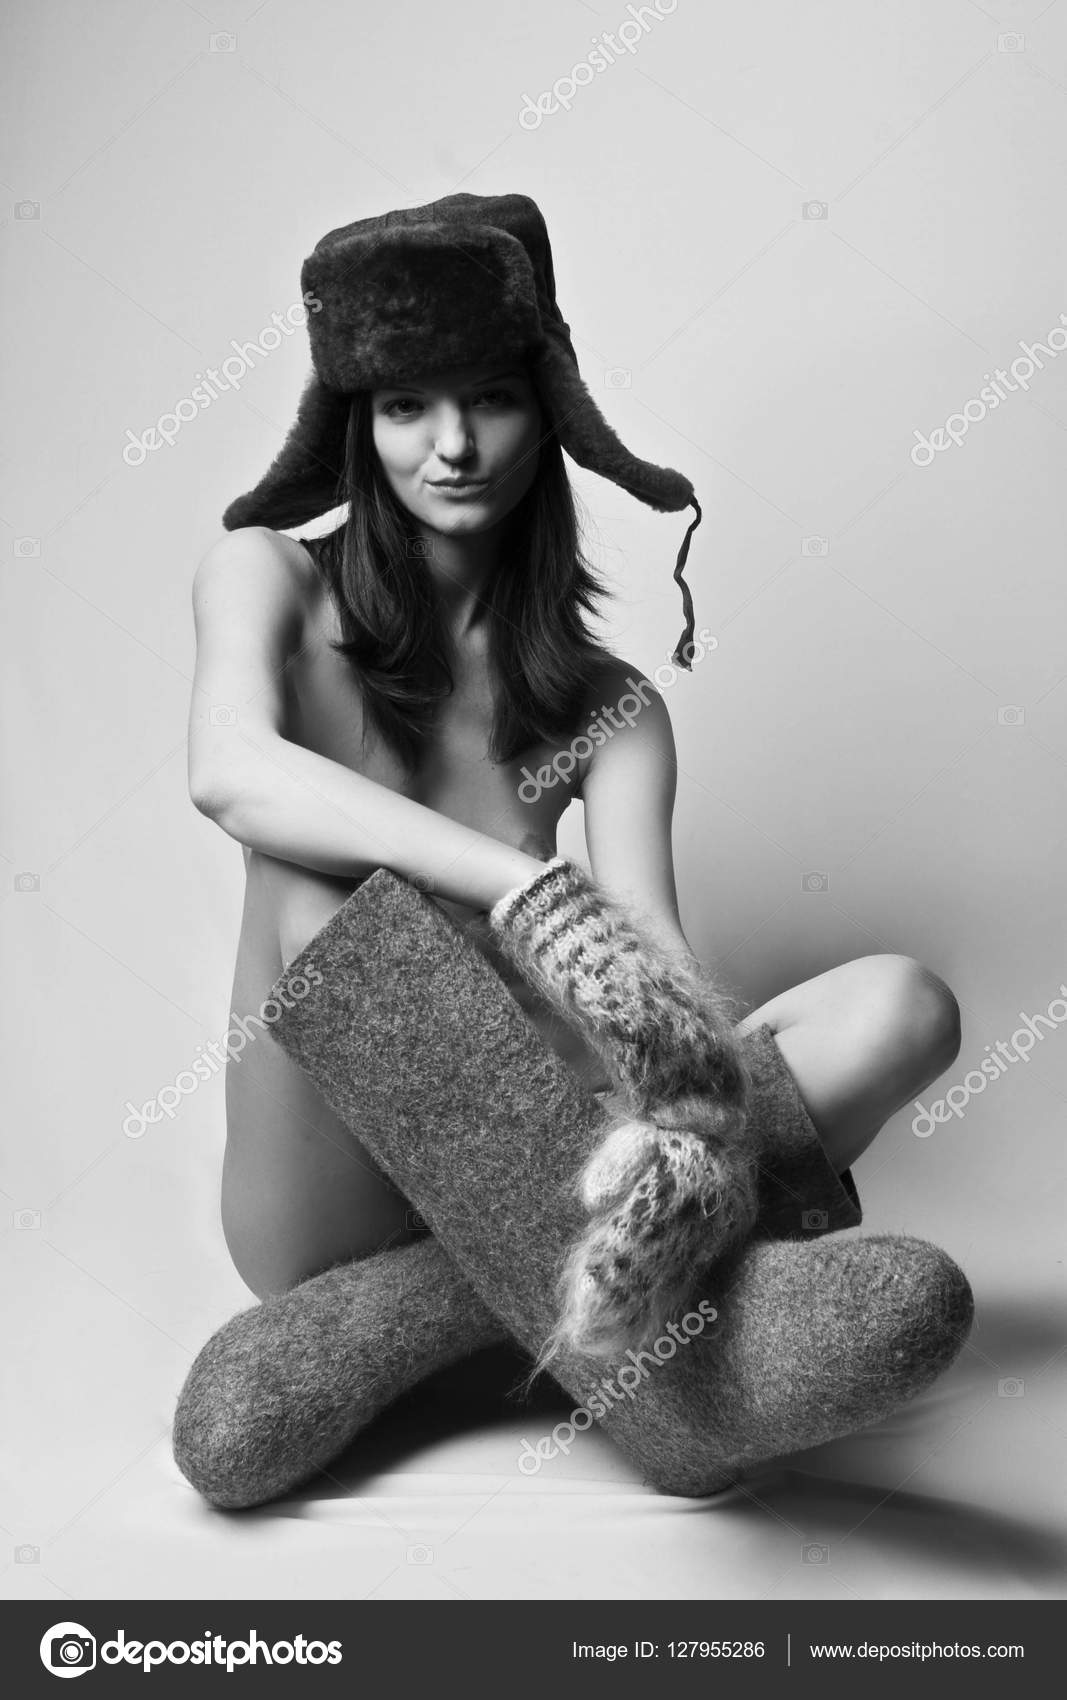 Hot girls wearing boots-naked photo